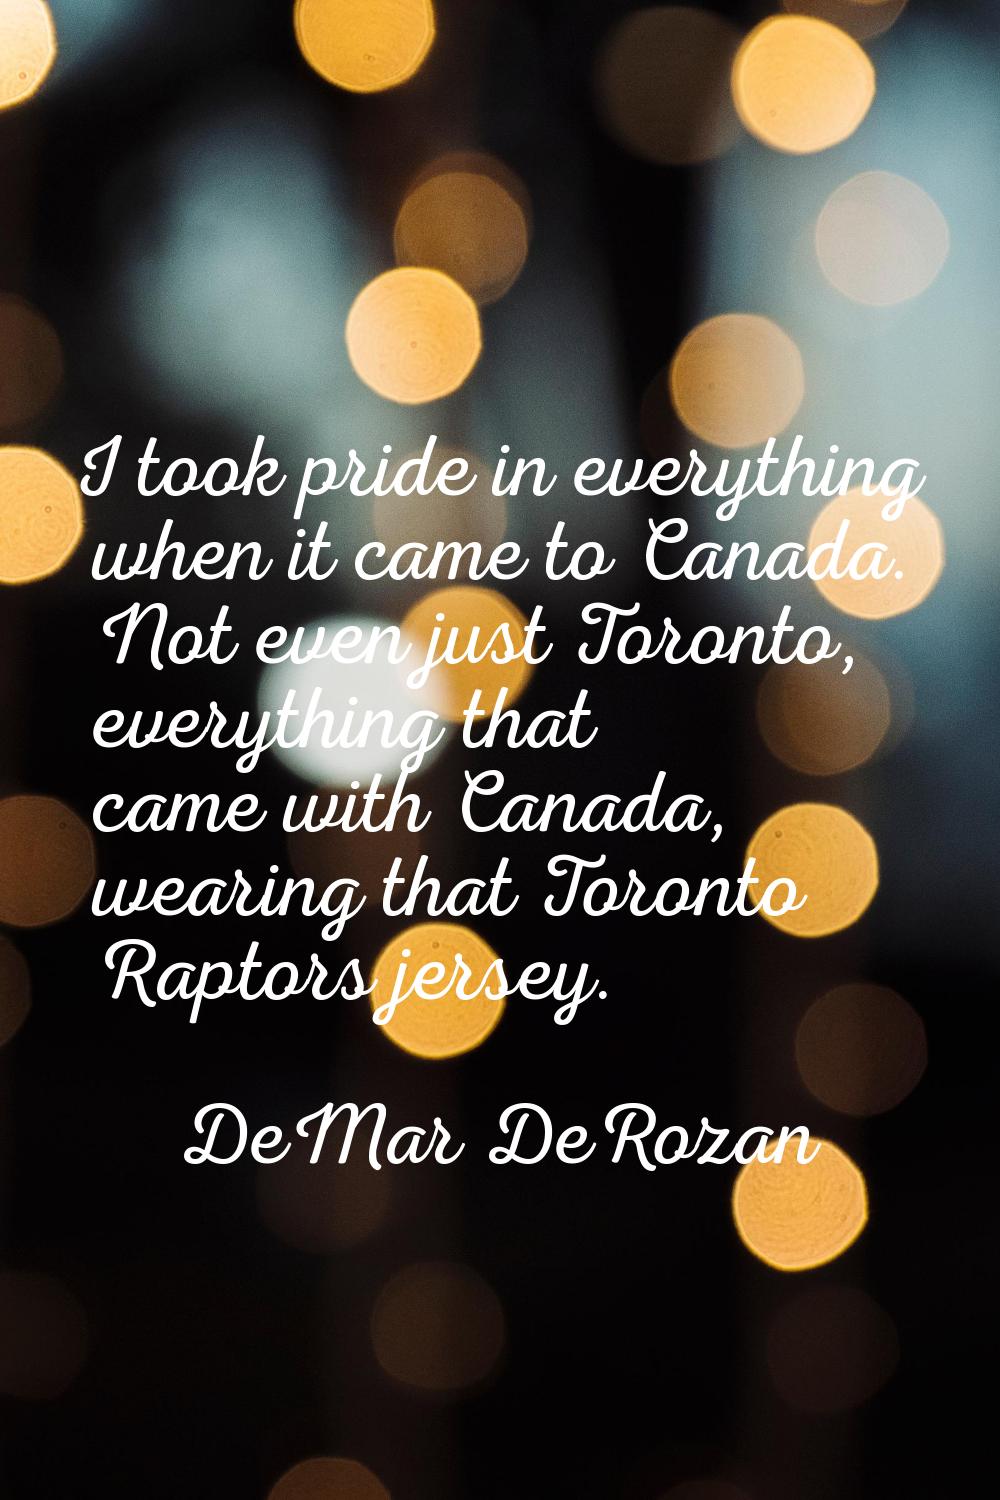 I took pride in everything when it came to Canada. Not even just Toronto, everything that came with